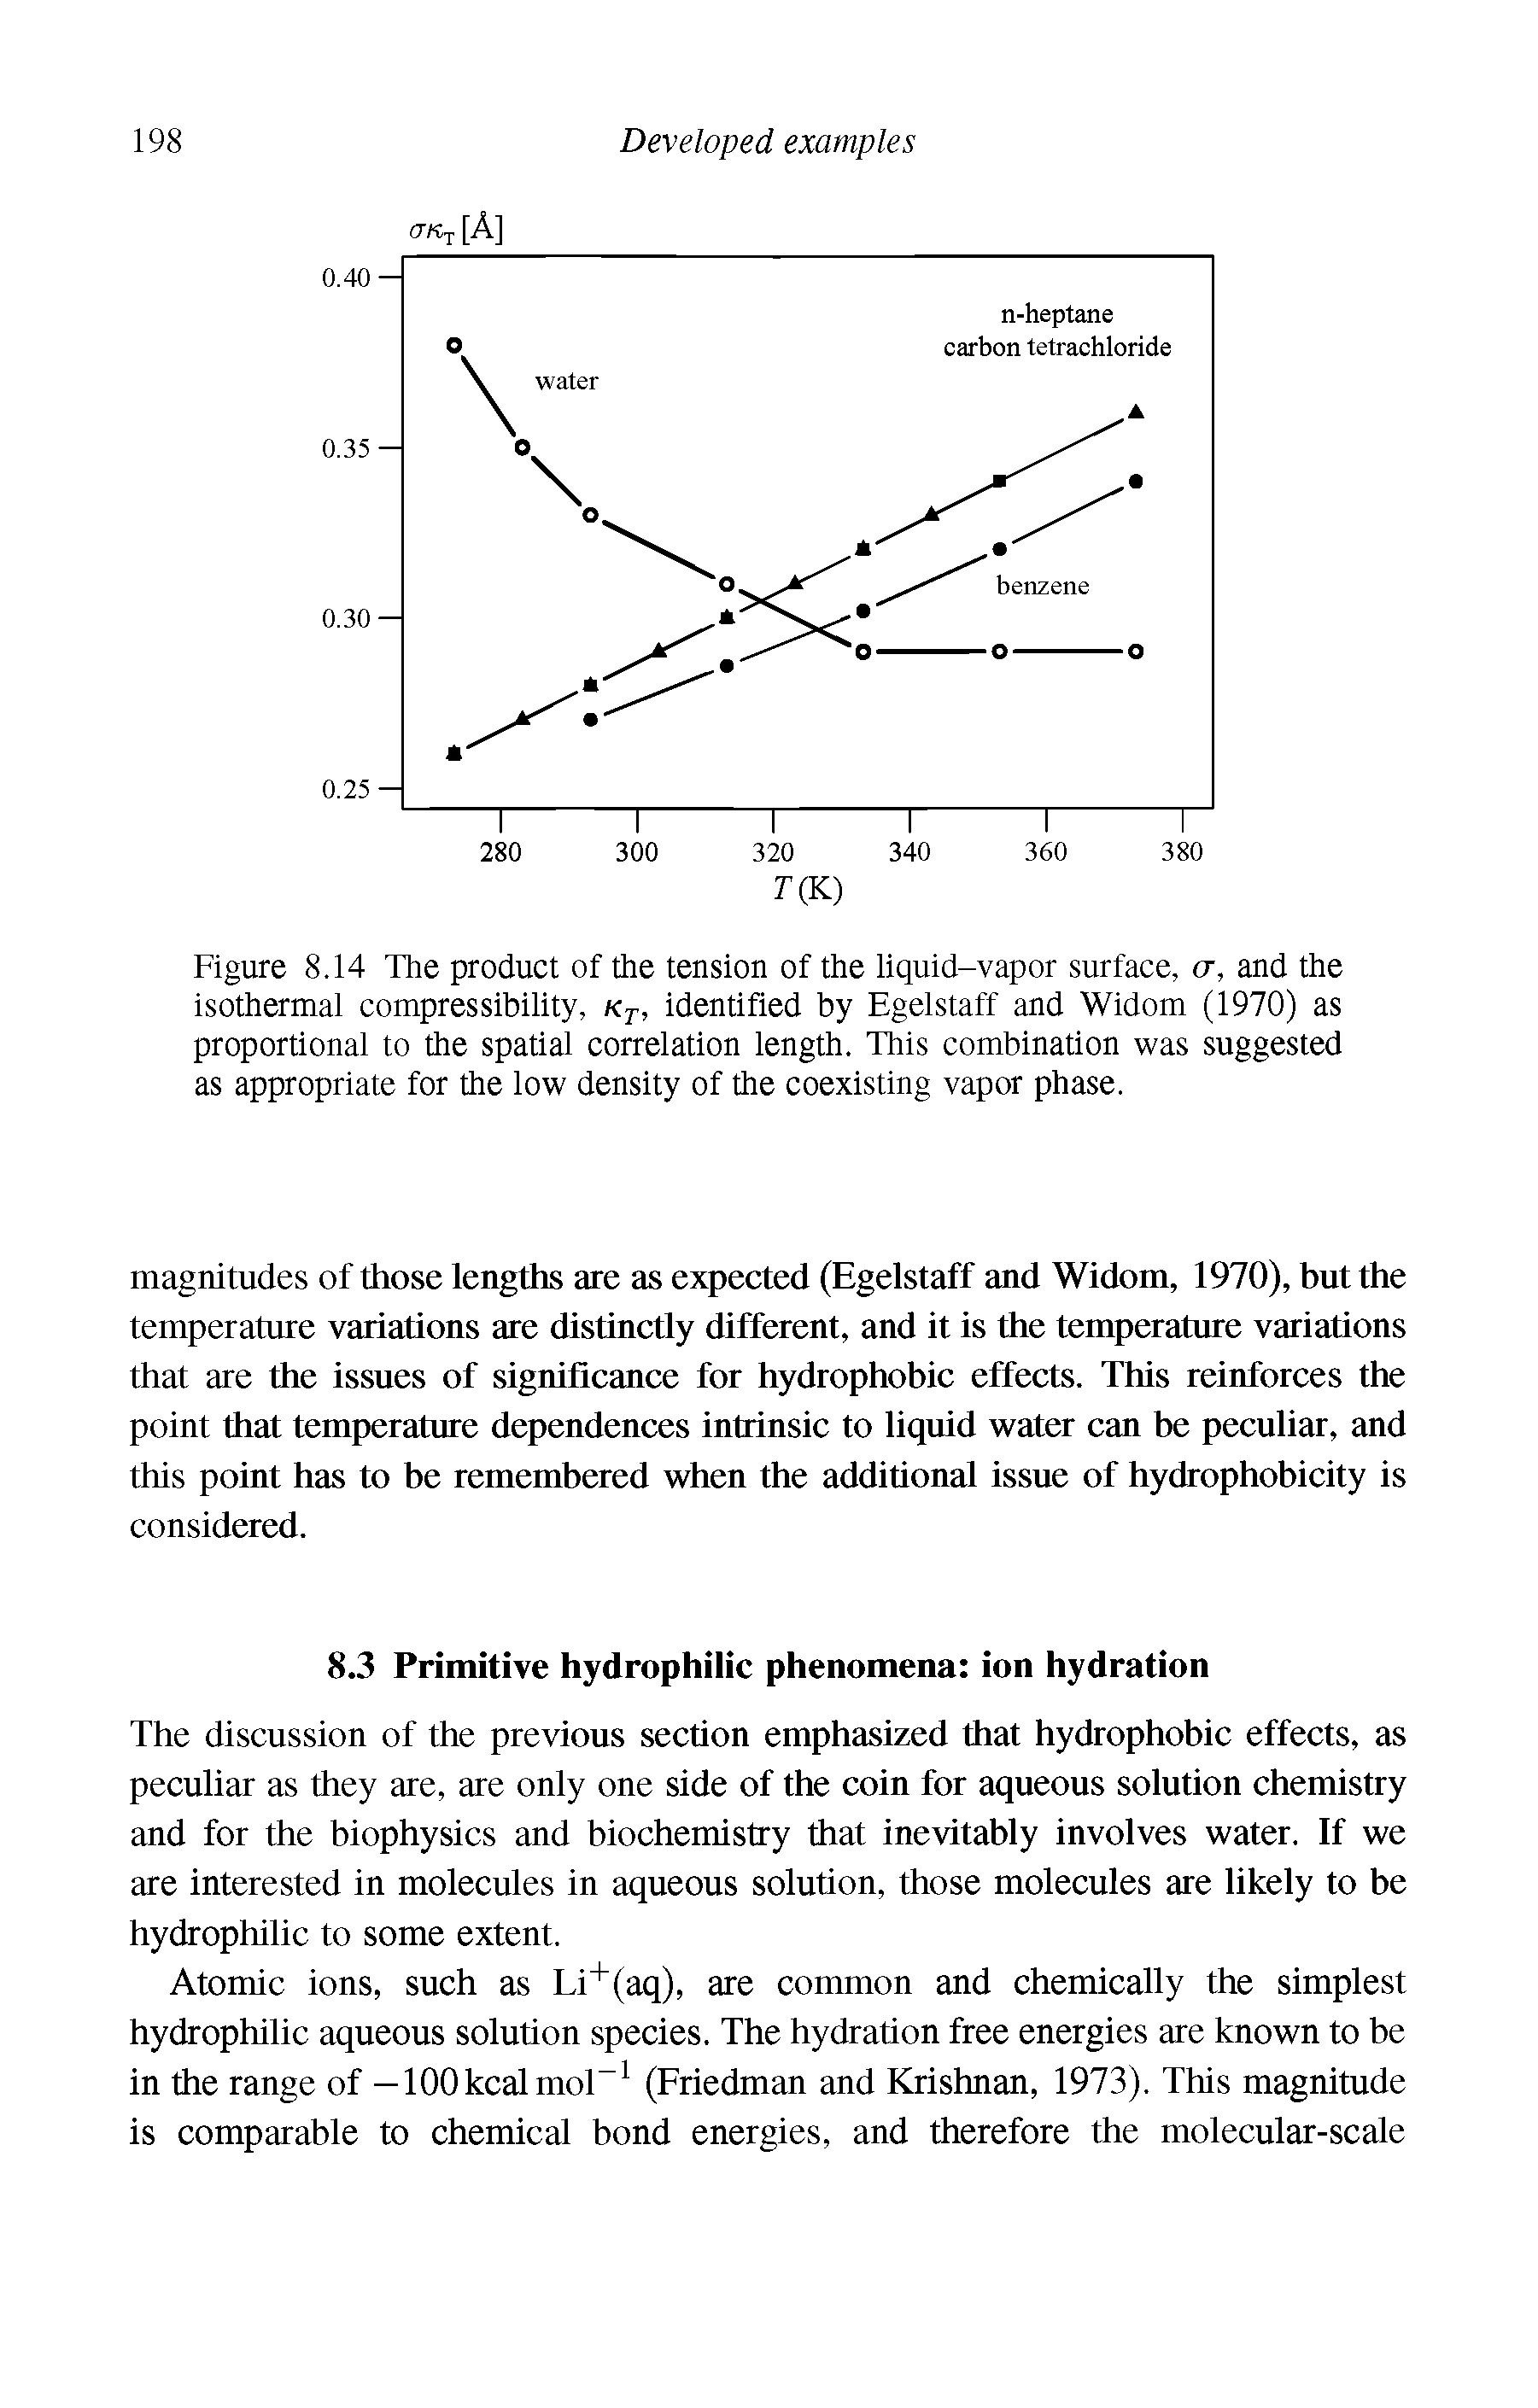 Figure 8.14 The product of the tension of the liquid-vapor surface, cr, and the isothermal compressibility, Kj-, identified by Egelstaff and Widom (1970) as proportional to the spatial correlation length. This combination was suggested as appropriate for the low density of the coexisting vapor phase.